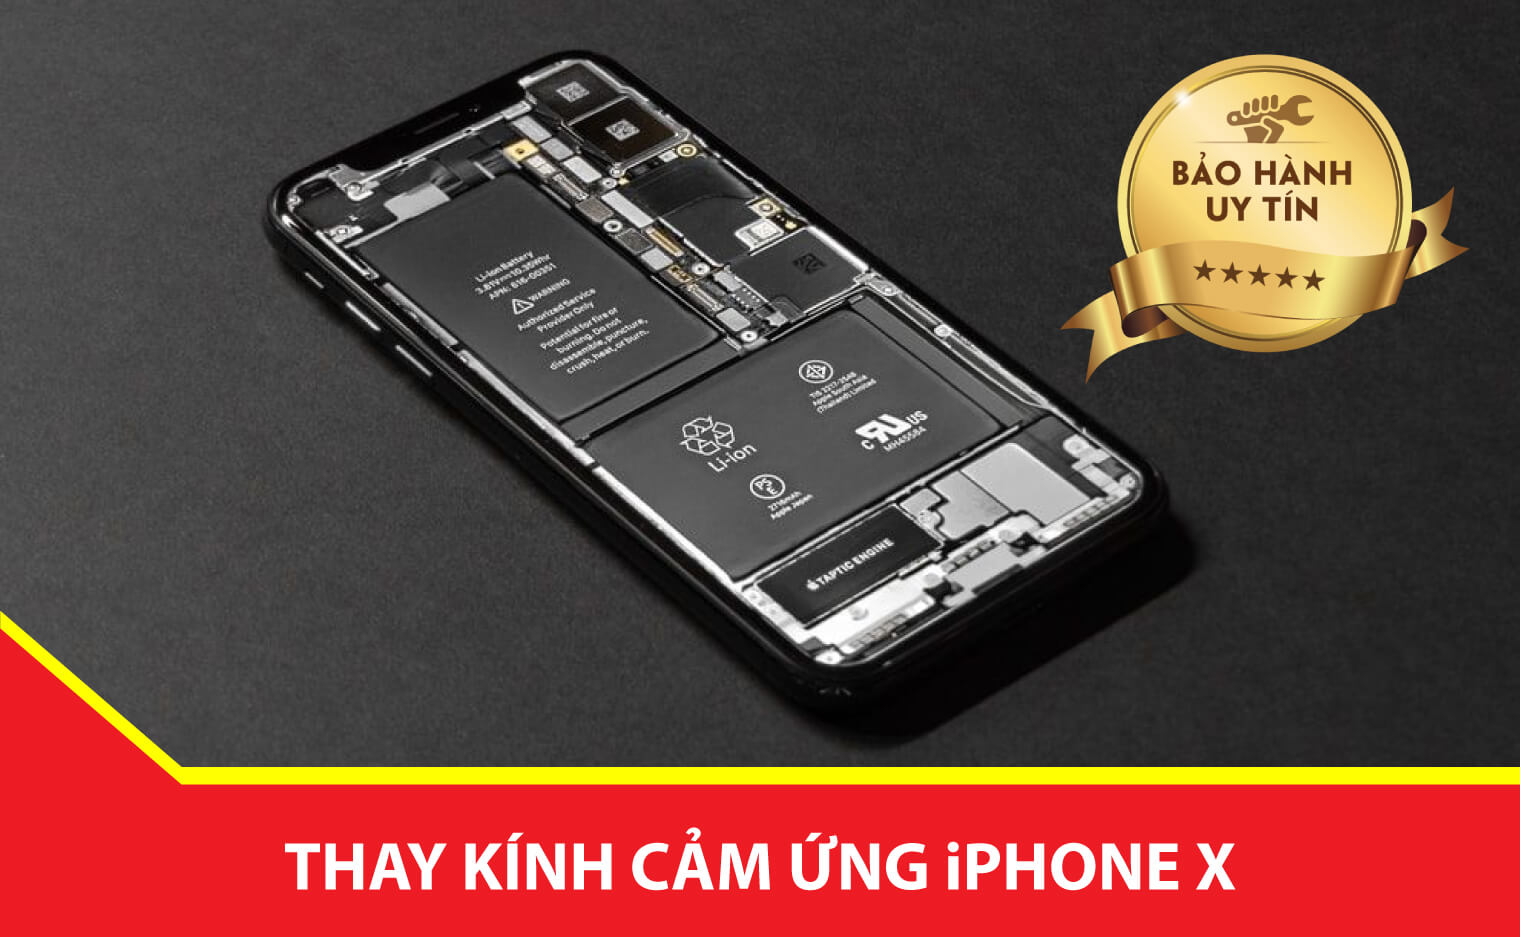 thay kinh cam ung iphone x